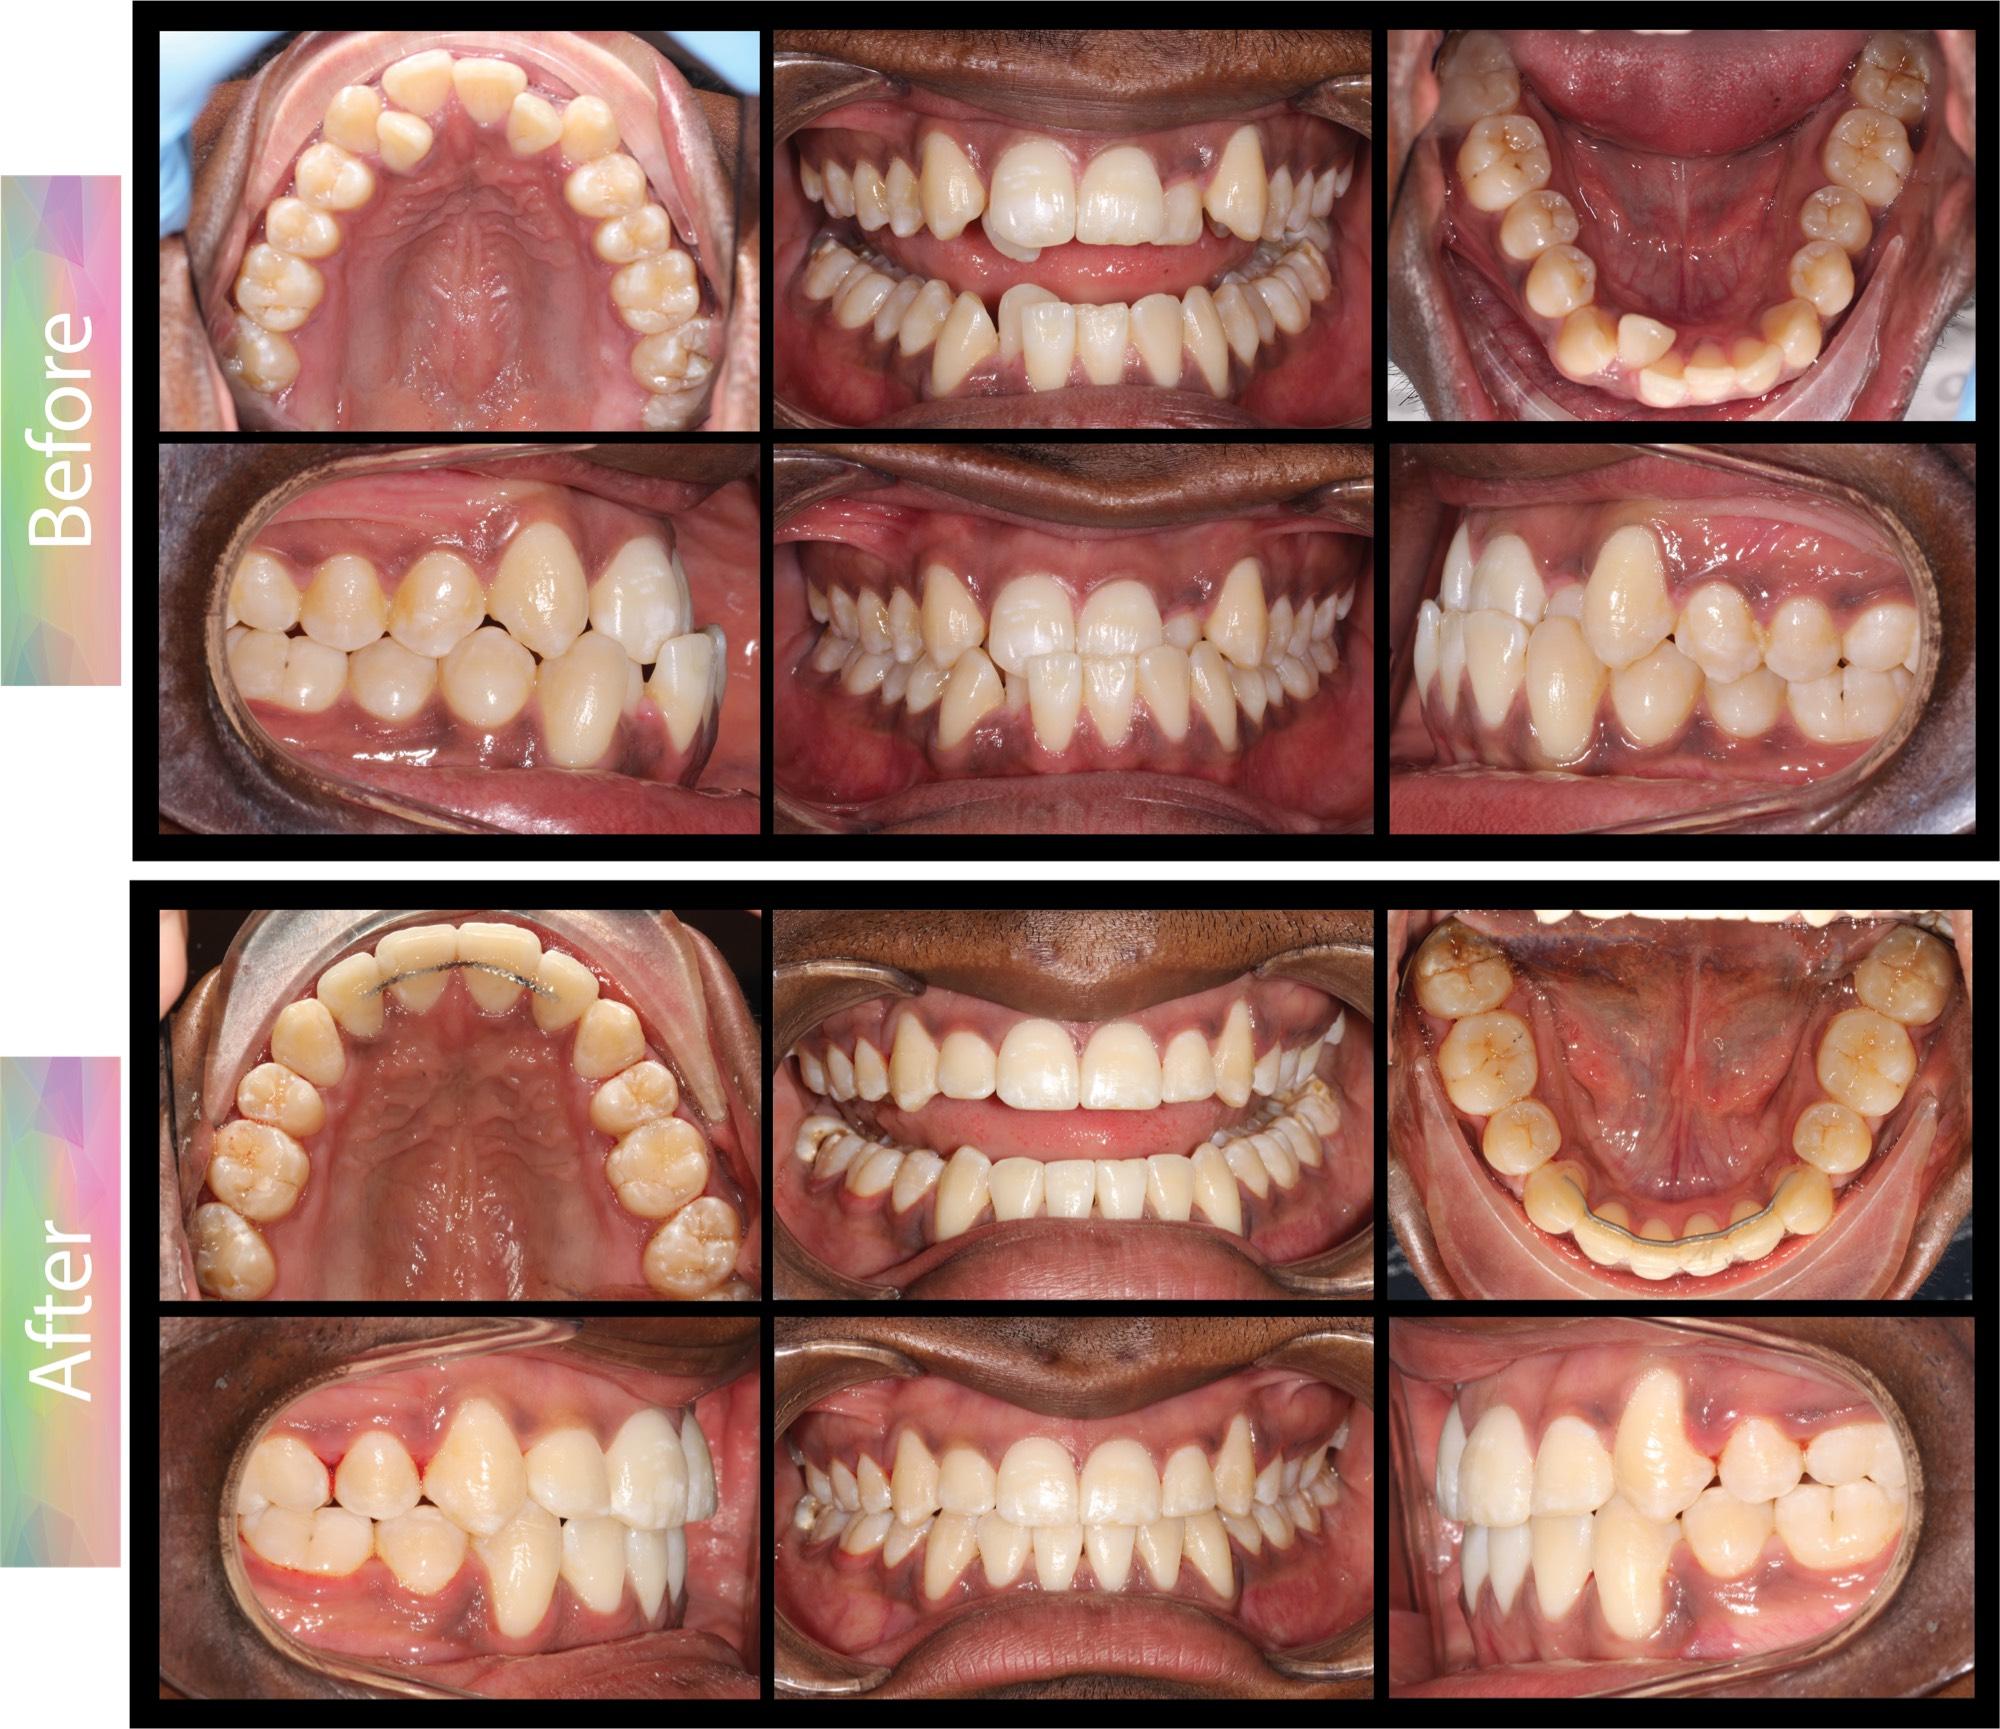 OrthoBoutique - CASE #17 Class III bite relationship, underbite, crowding Before and after